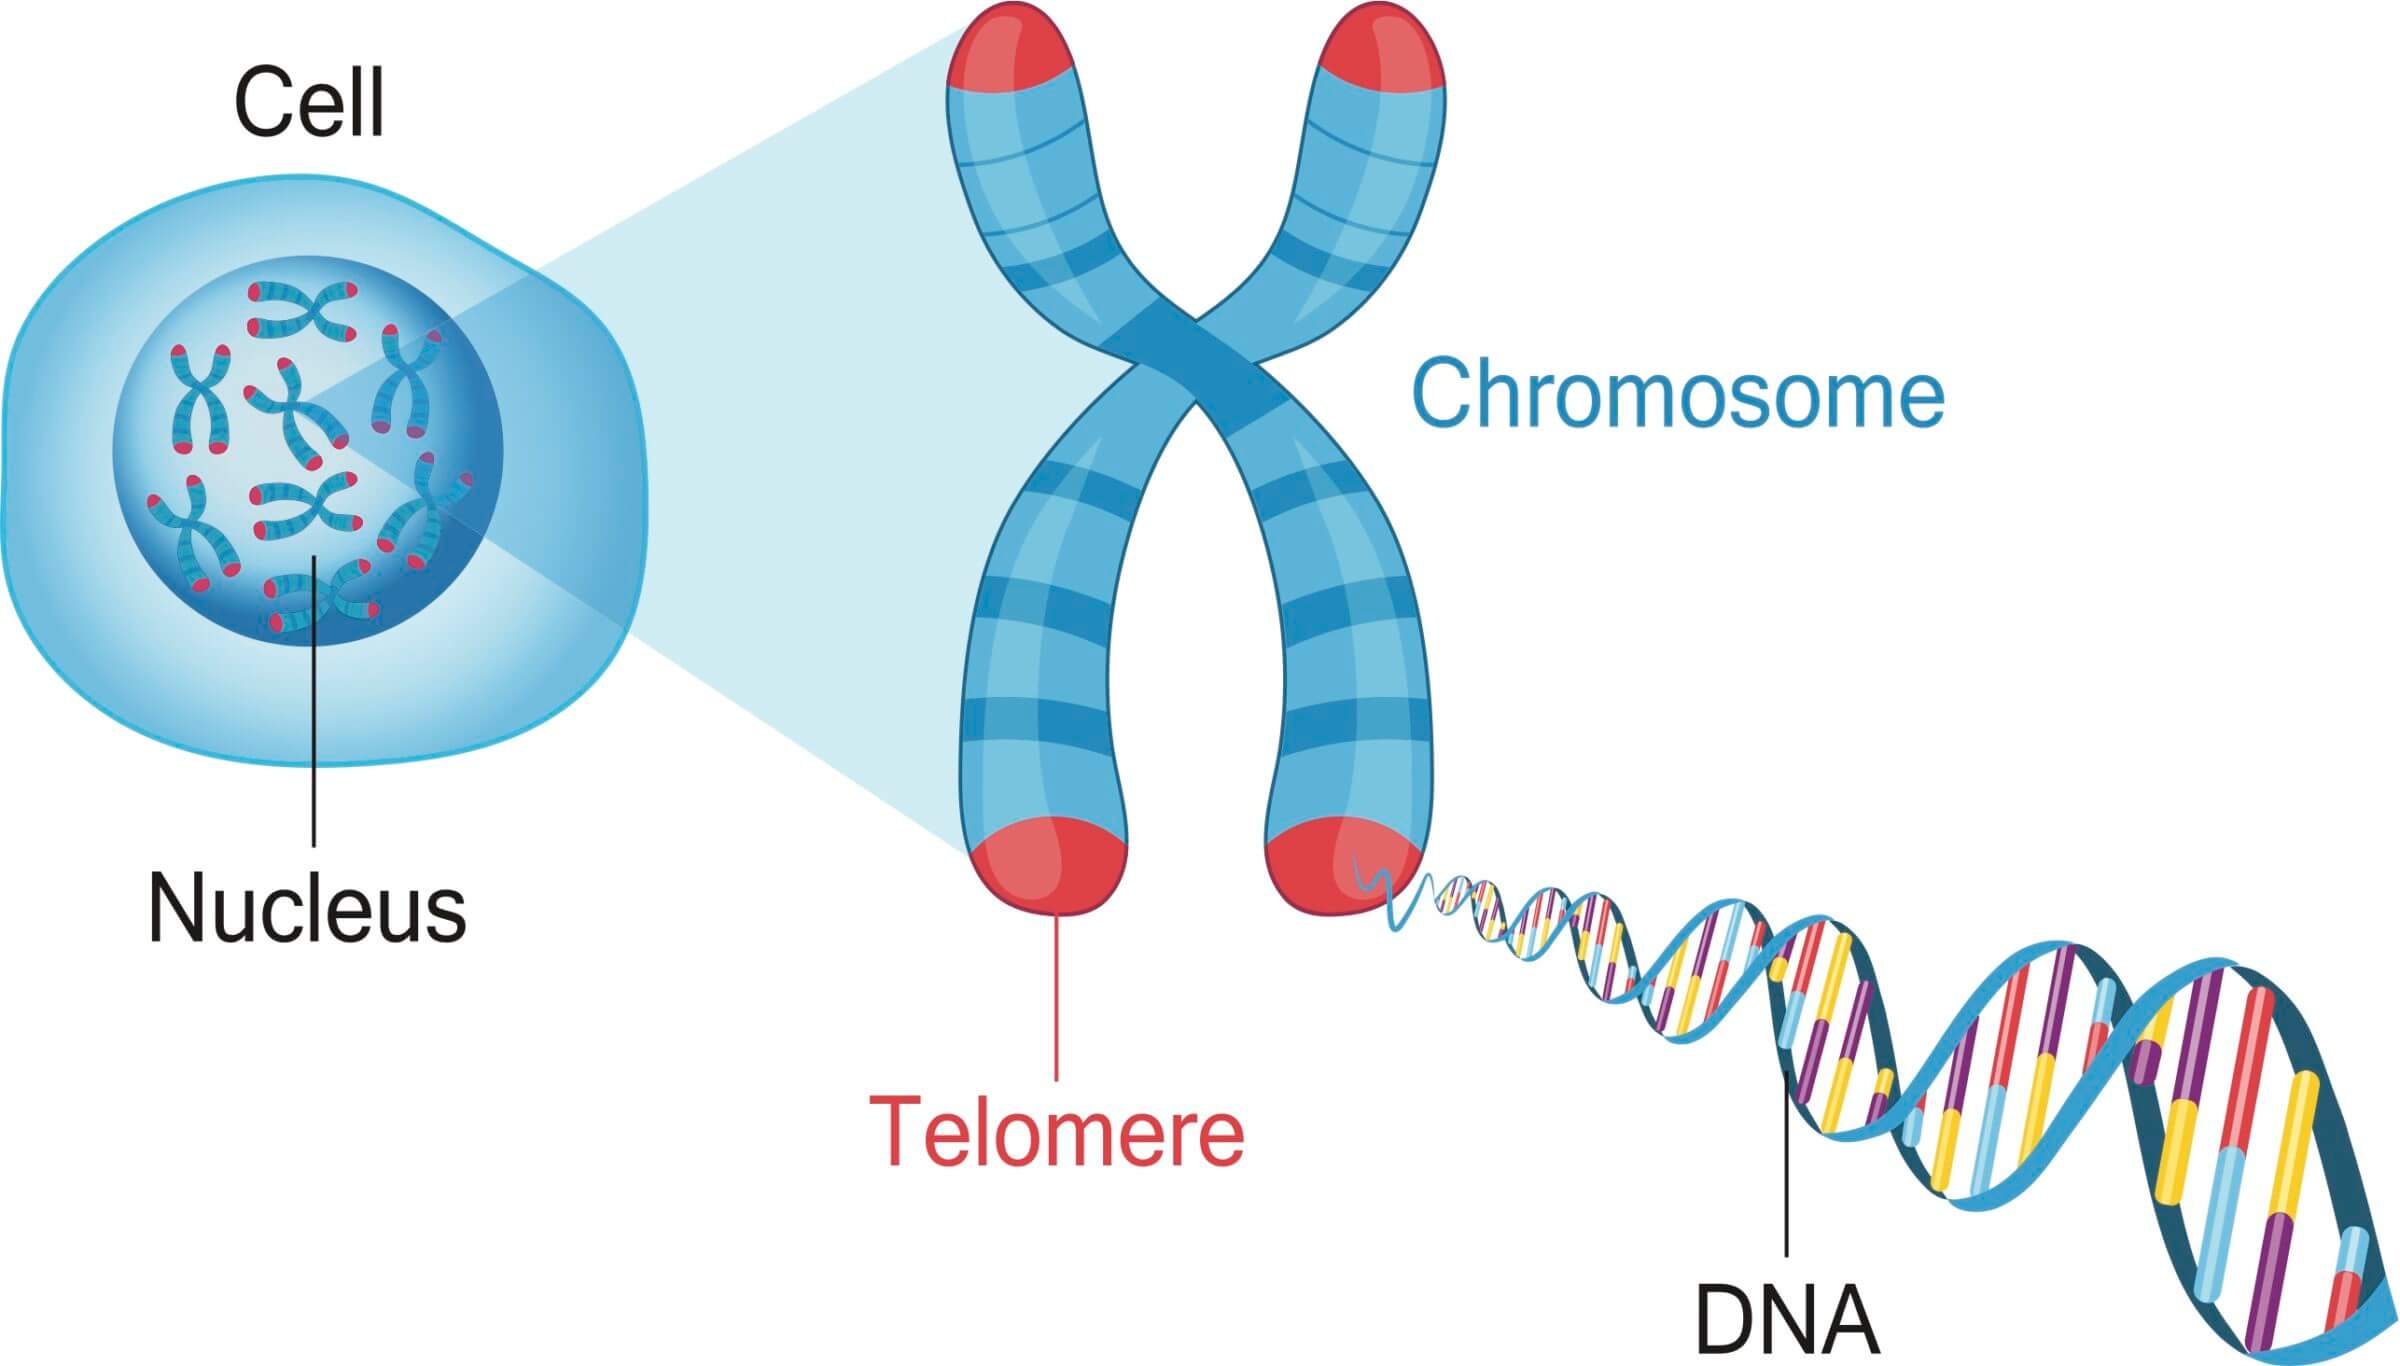 Telomeres protect our chromosomes.